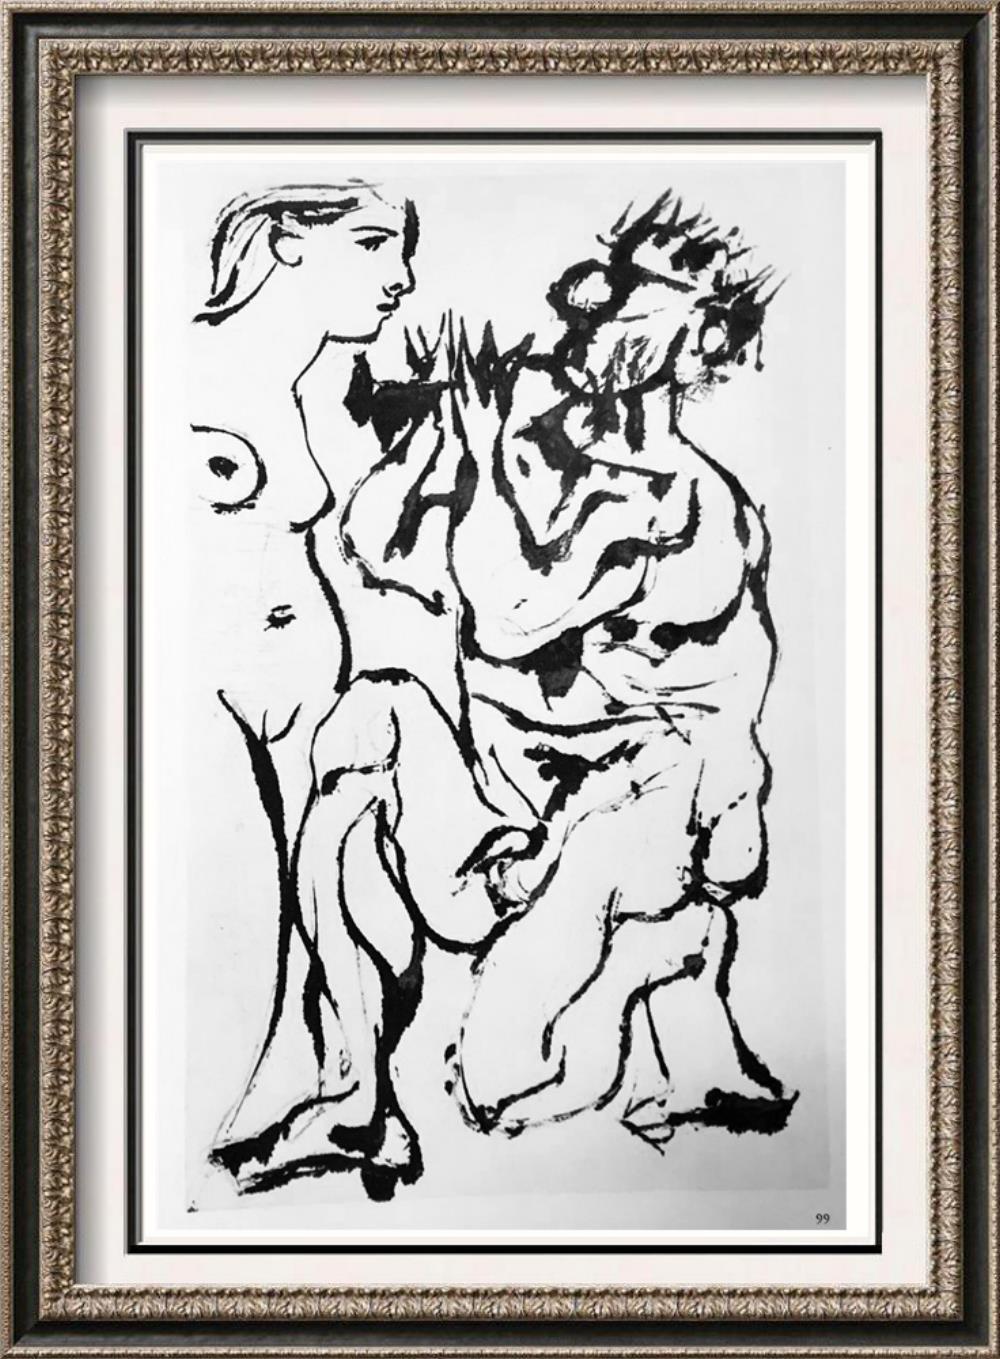 Pablo Picasso Pan Plays to a Standing Woman c. 1933-34 Fine Art Print from Museum Artist